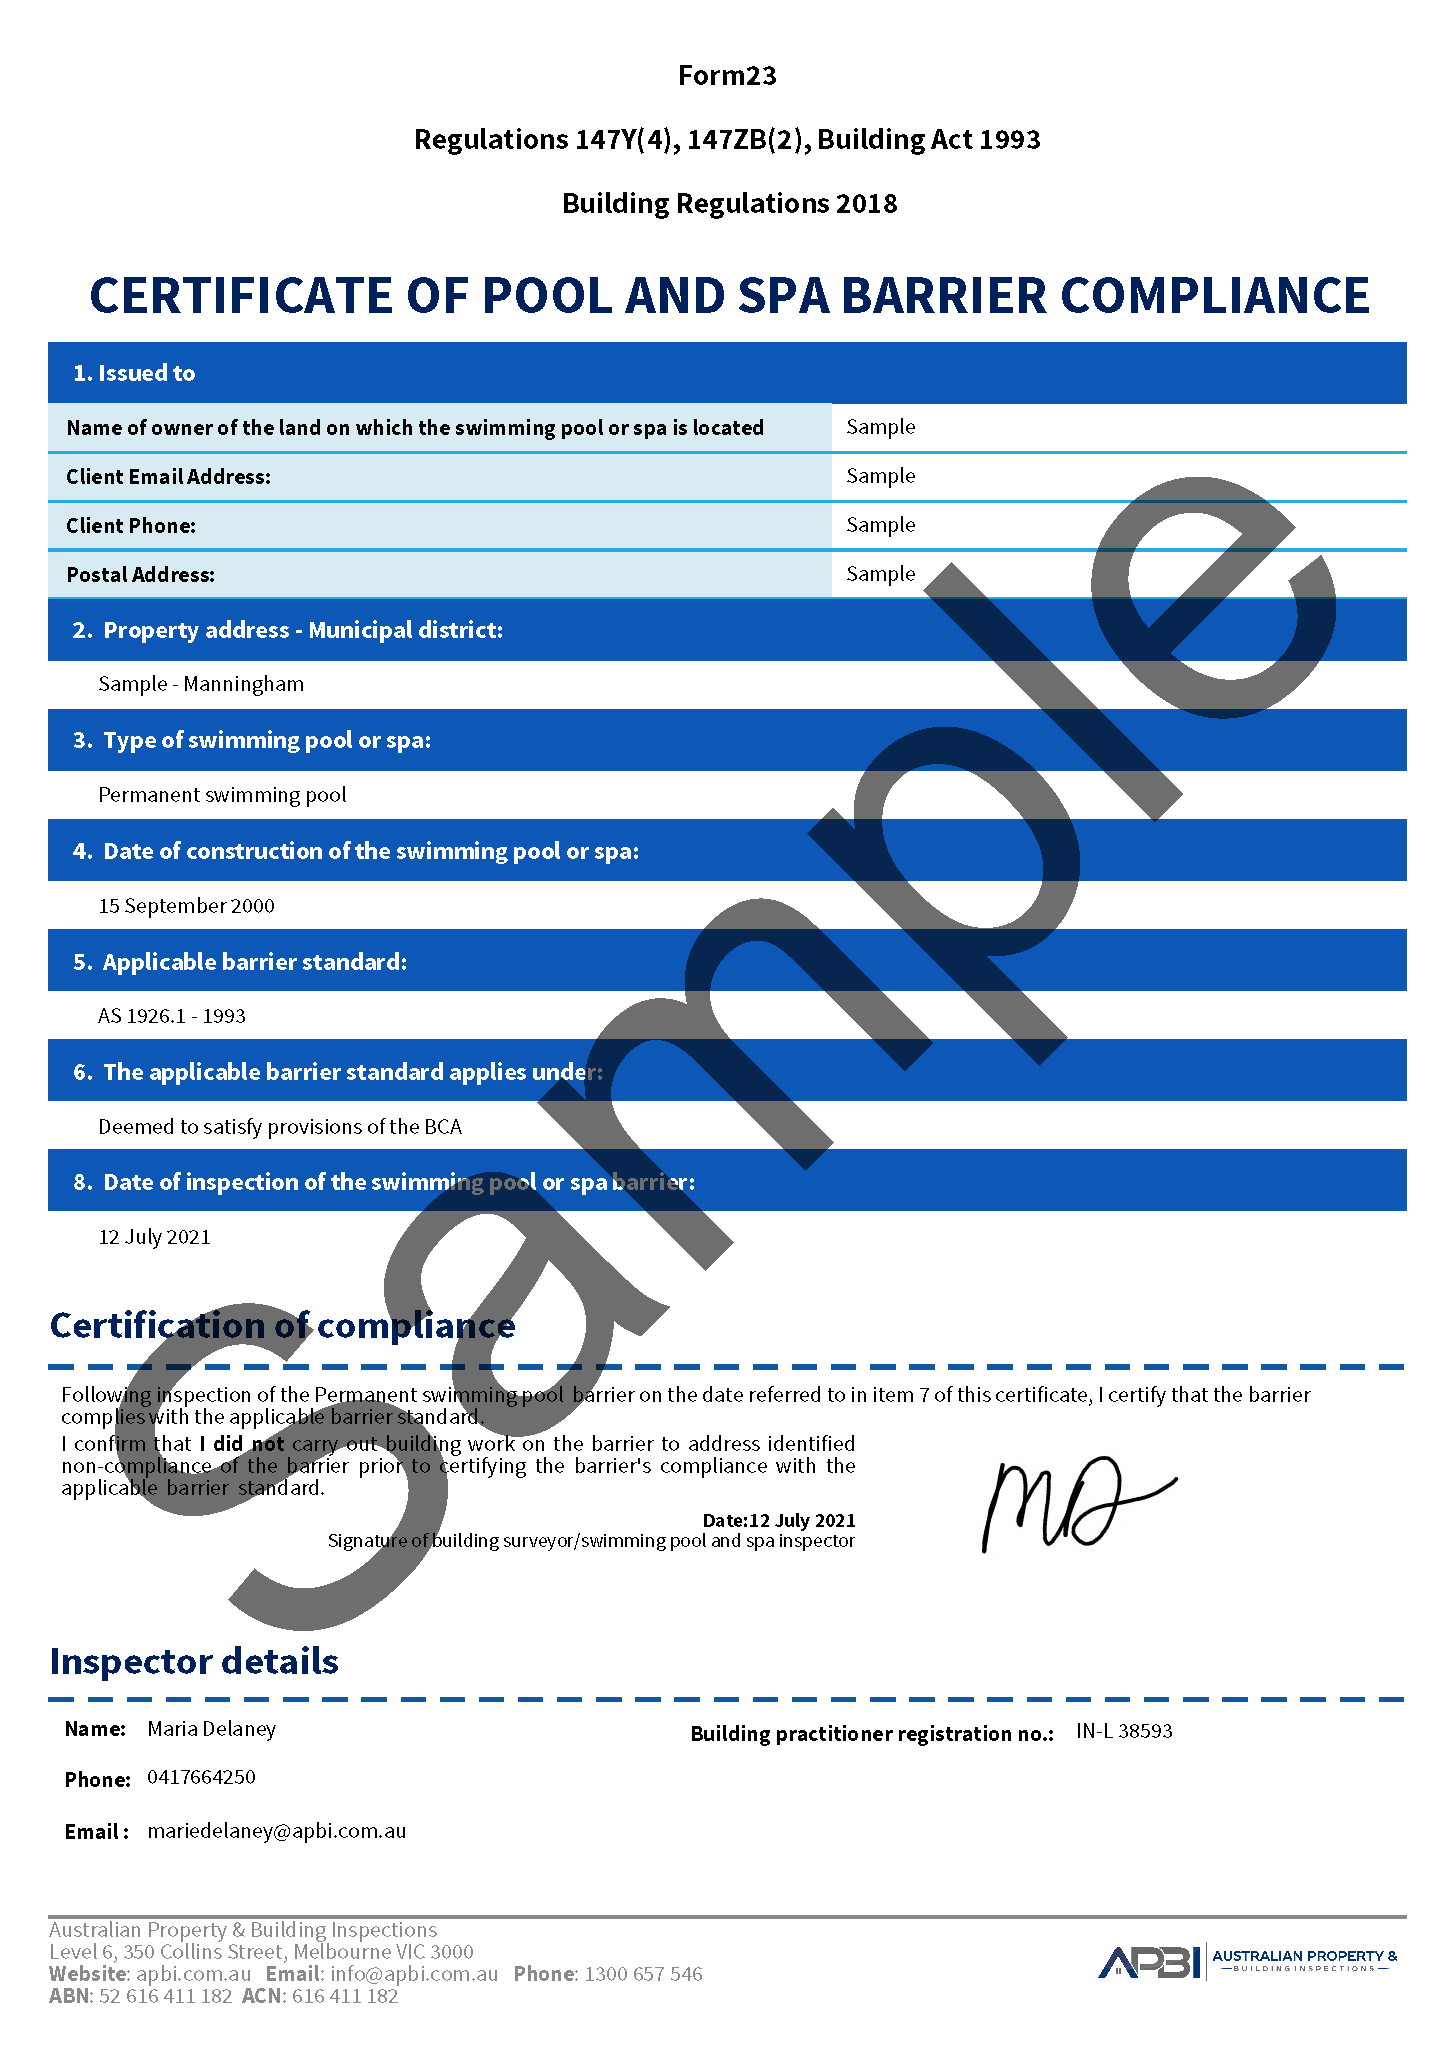 Swimming pool Inspection Certficate Form 23